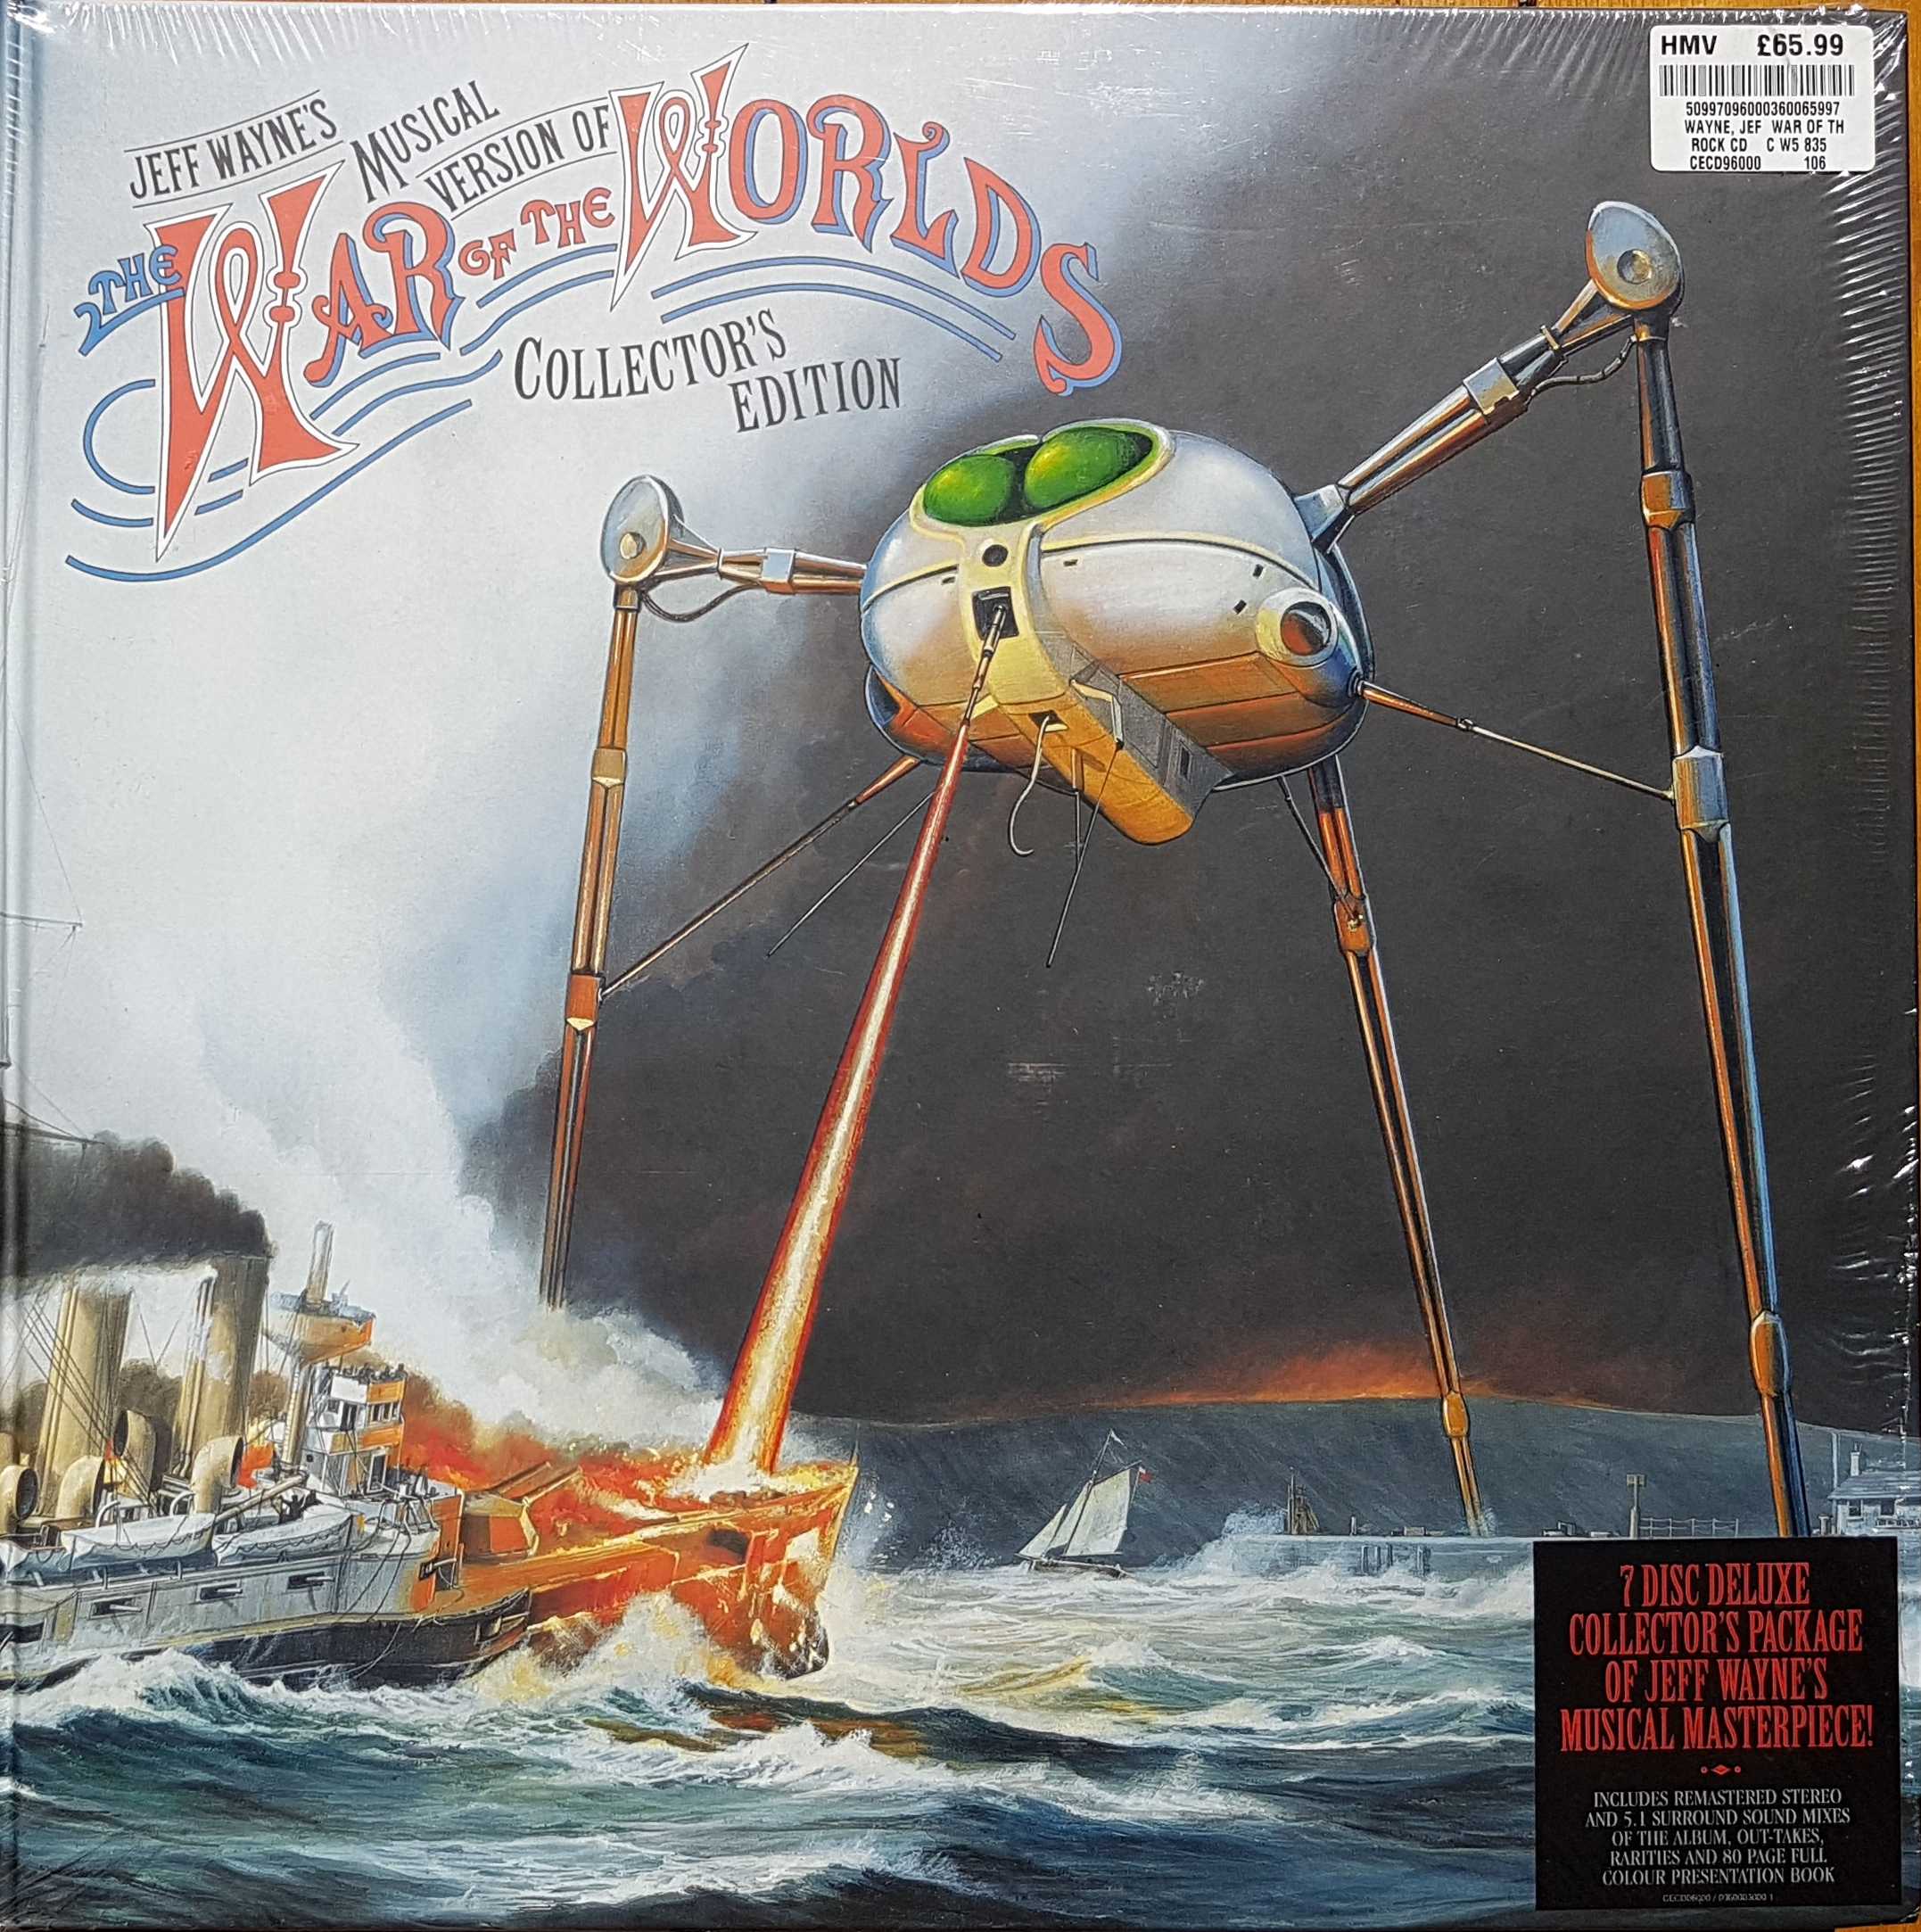 Picture of War of the Worlds by artist Jeff Wayne from ITV, Channel 4 and Channel 5 cds library